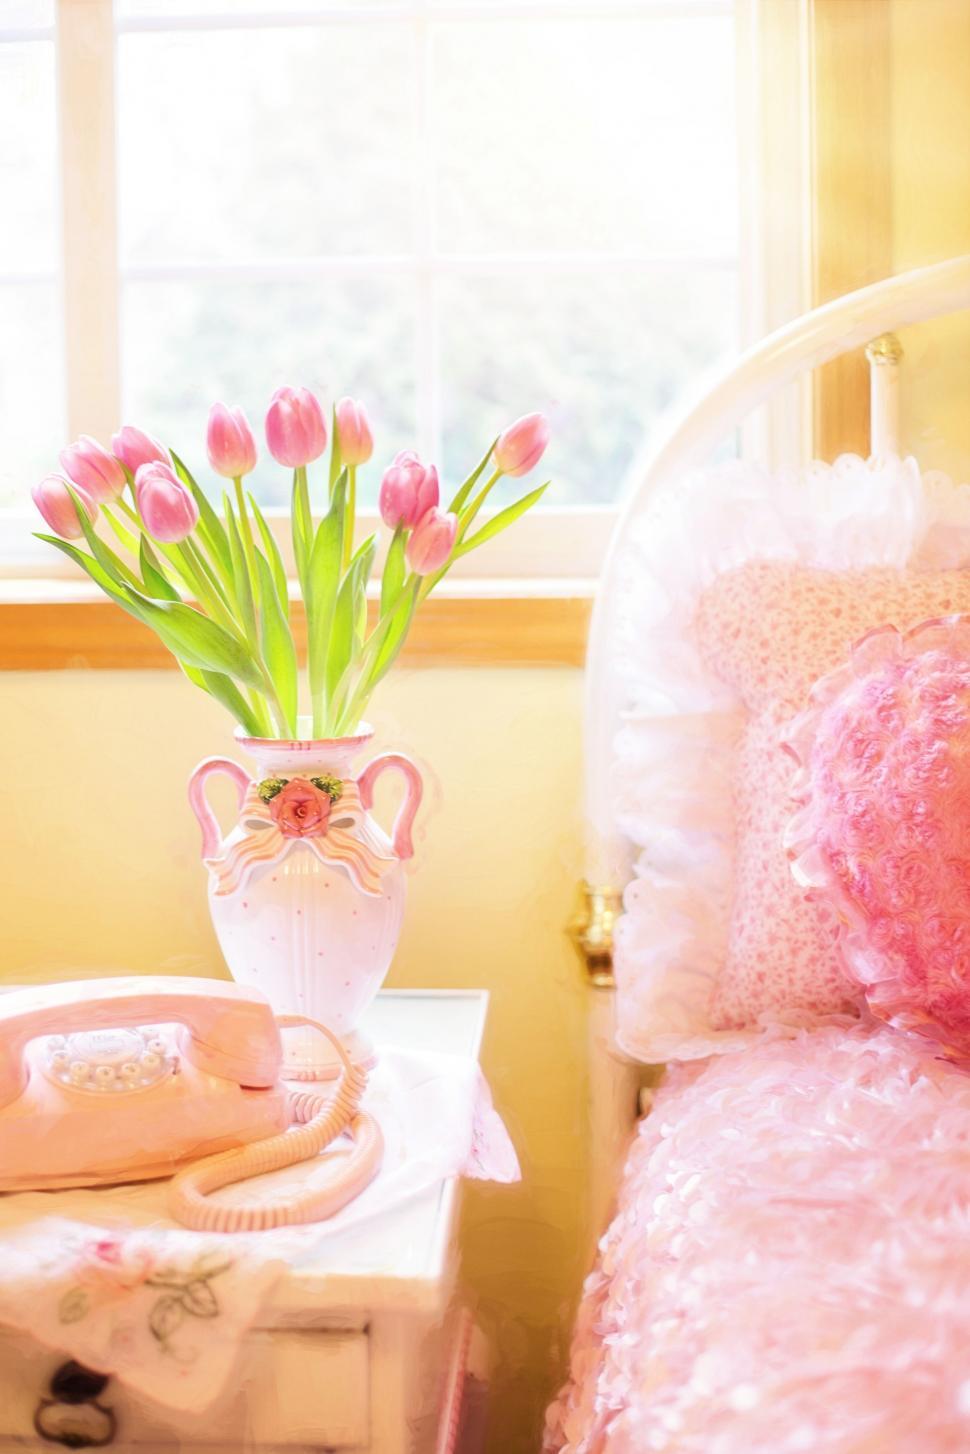 Free Image of Pink Flowers in Vase with Pink Bed and window 